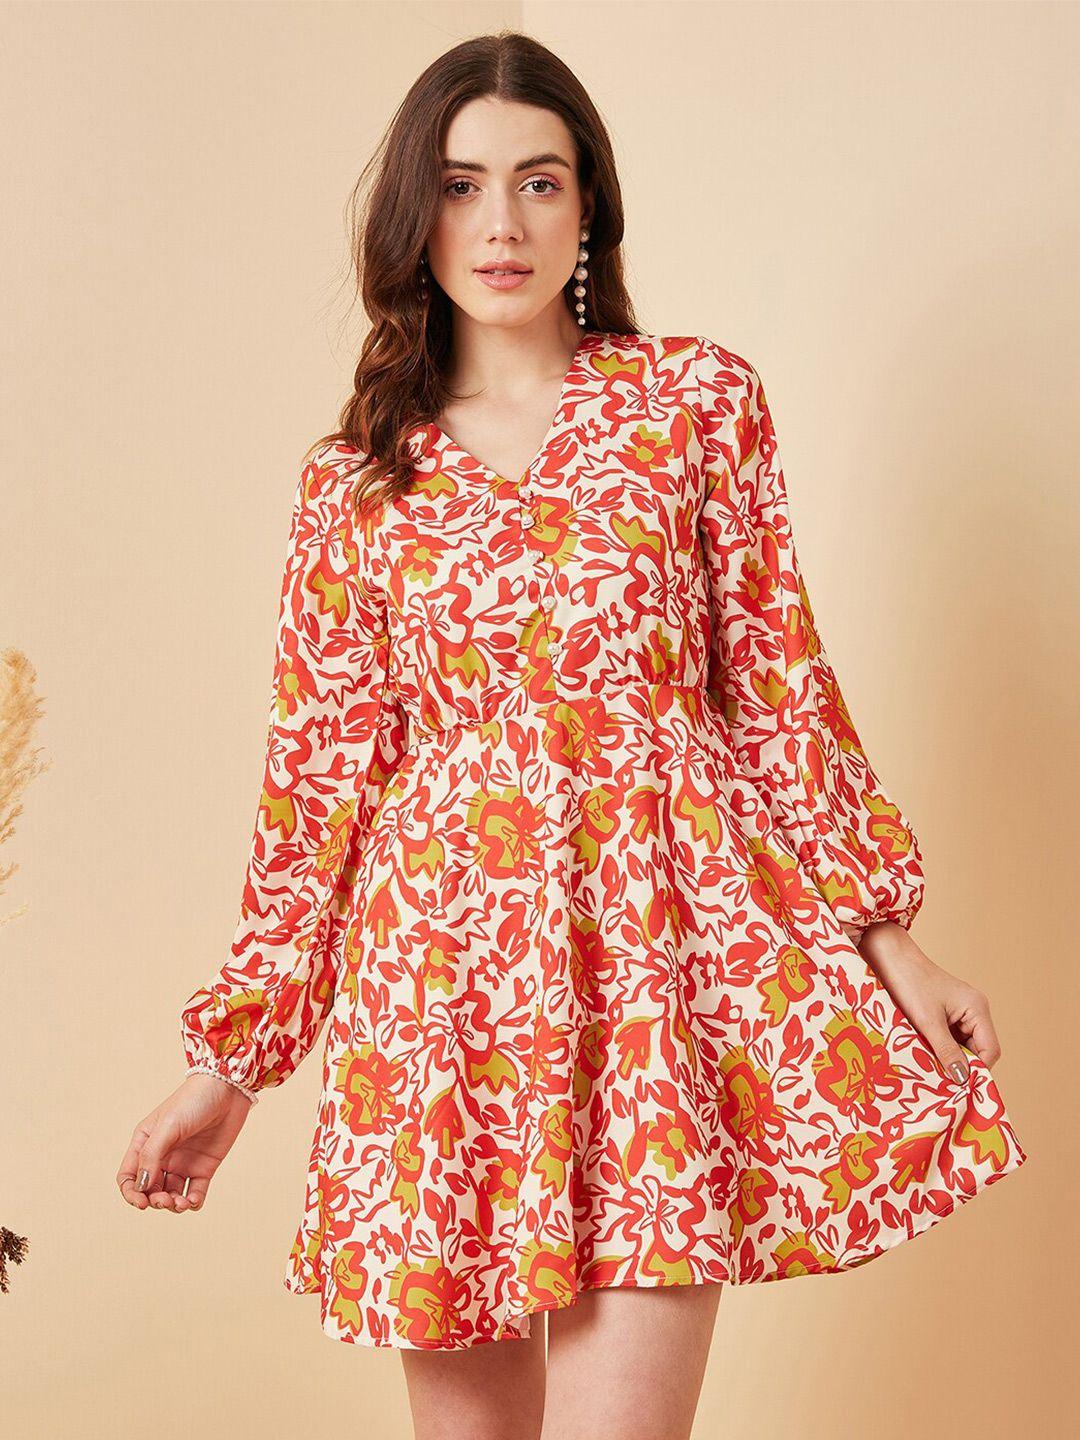 marie claire floral printed v-neck fit & flare dress